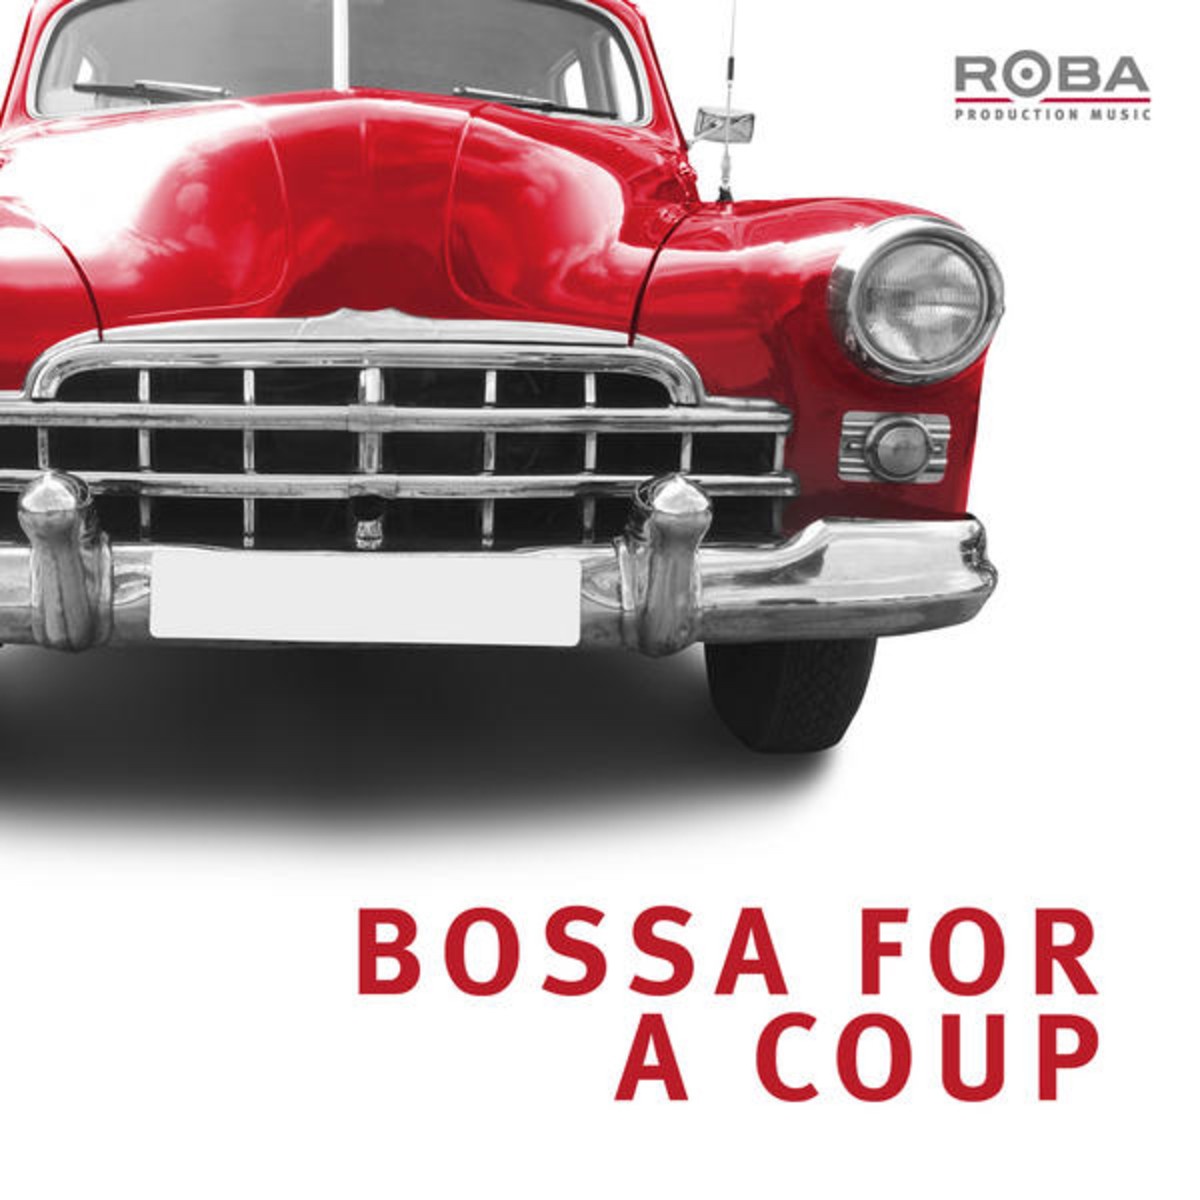 Bossa for a Coup Reloaded